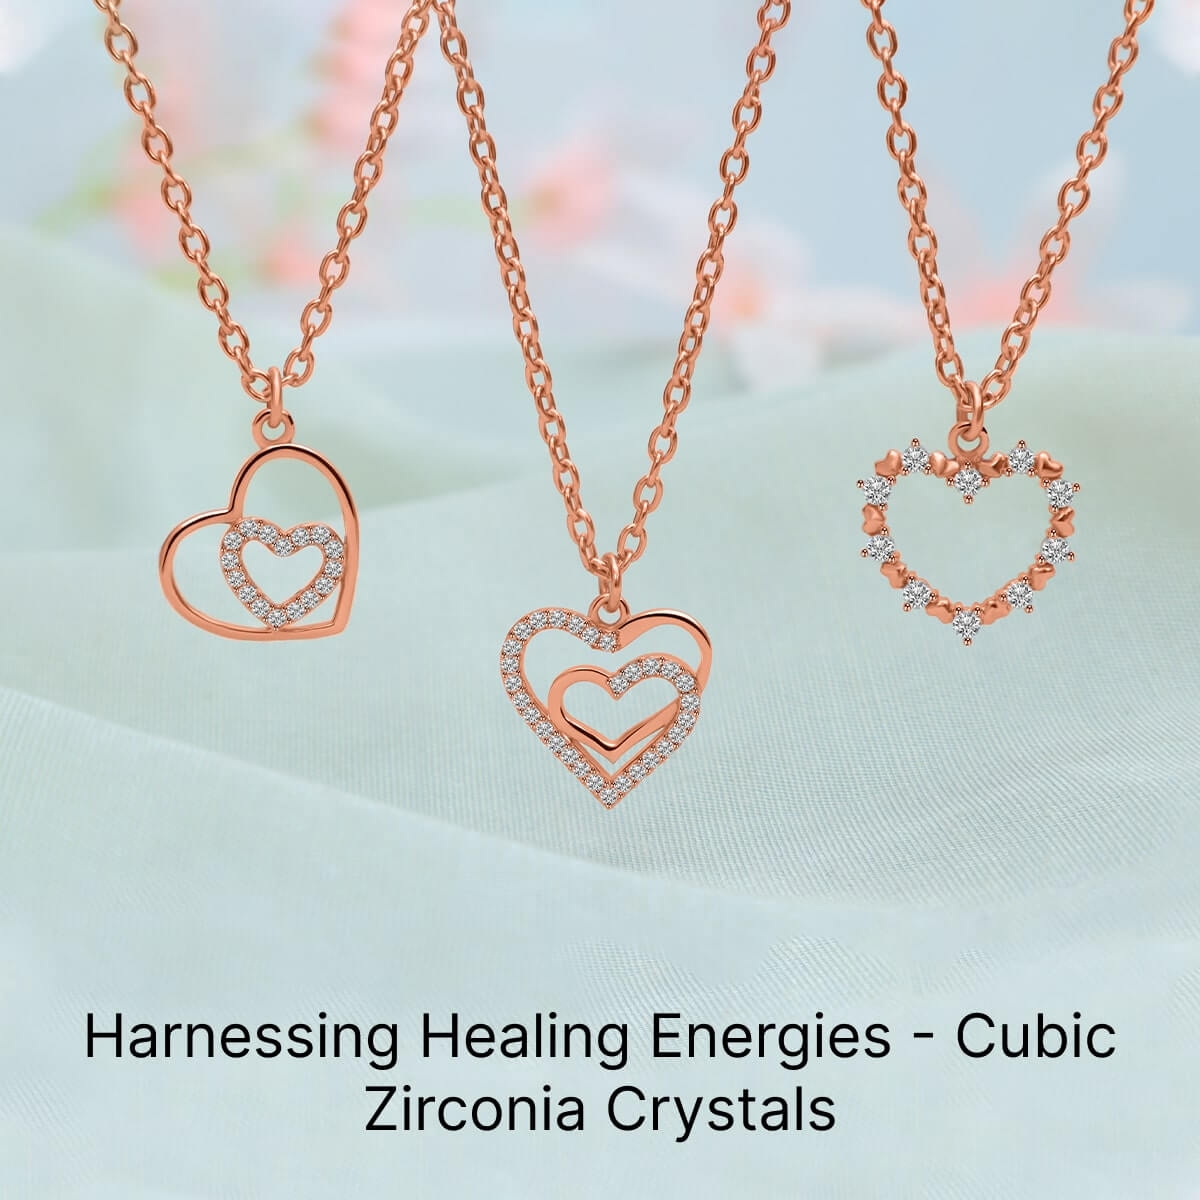 The healing powers of cubic zirconia crystals